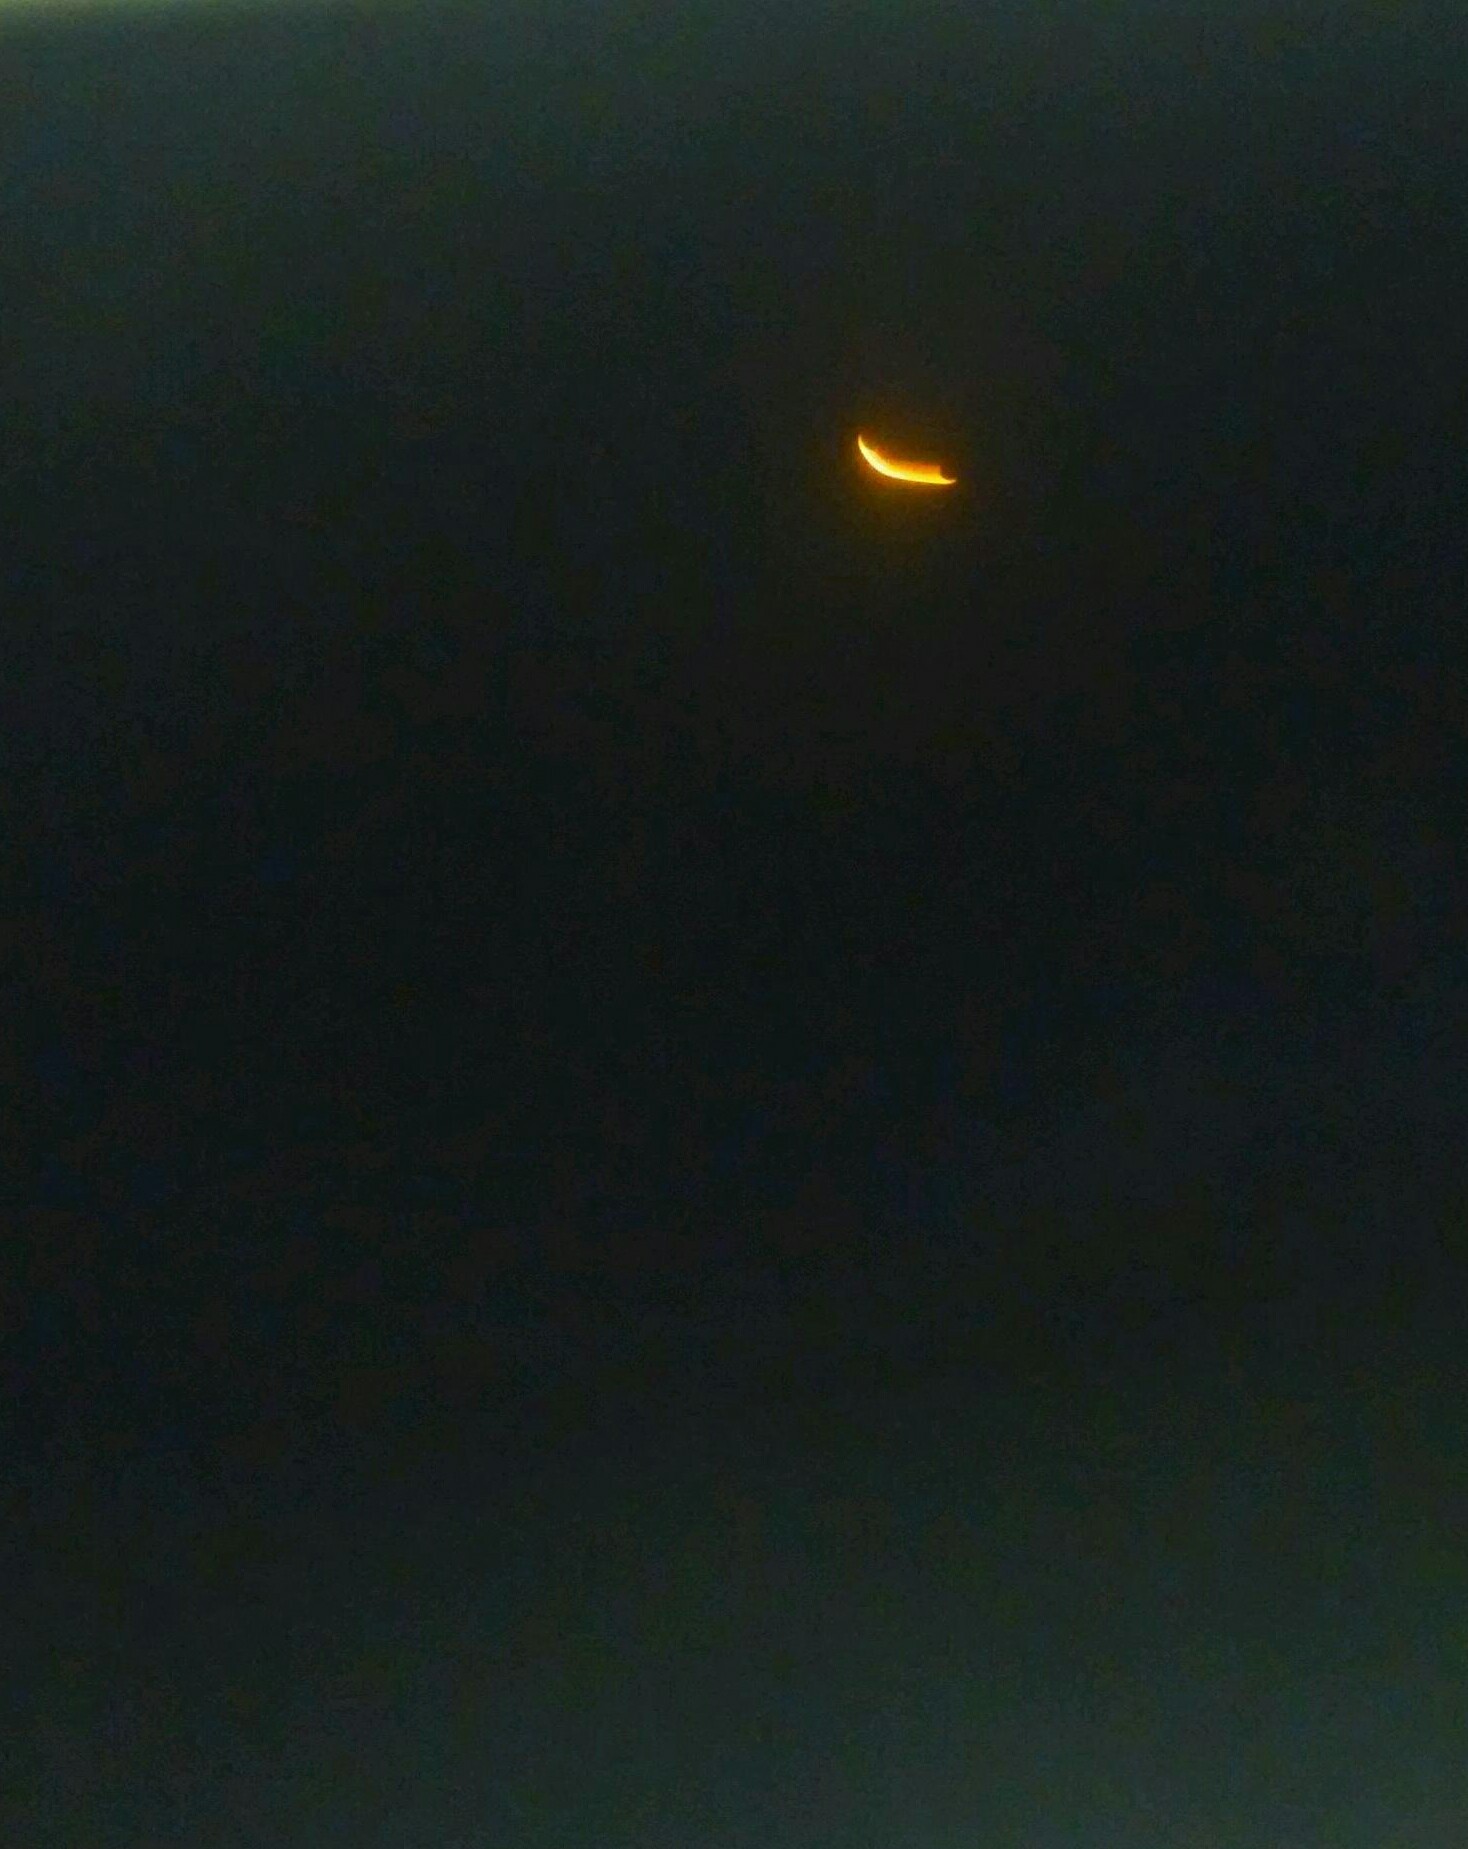 Susan Fagan Steiger: At its peak in Central Florida! This was taken with the Weatherboy eclipse glasses on me & the other pair over the camera lens. Quite a task.